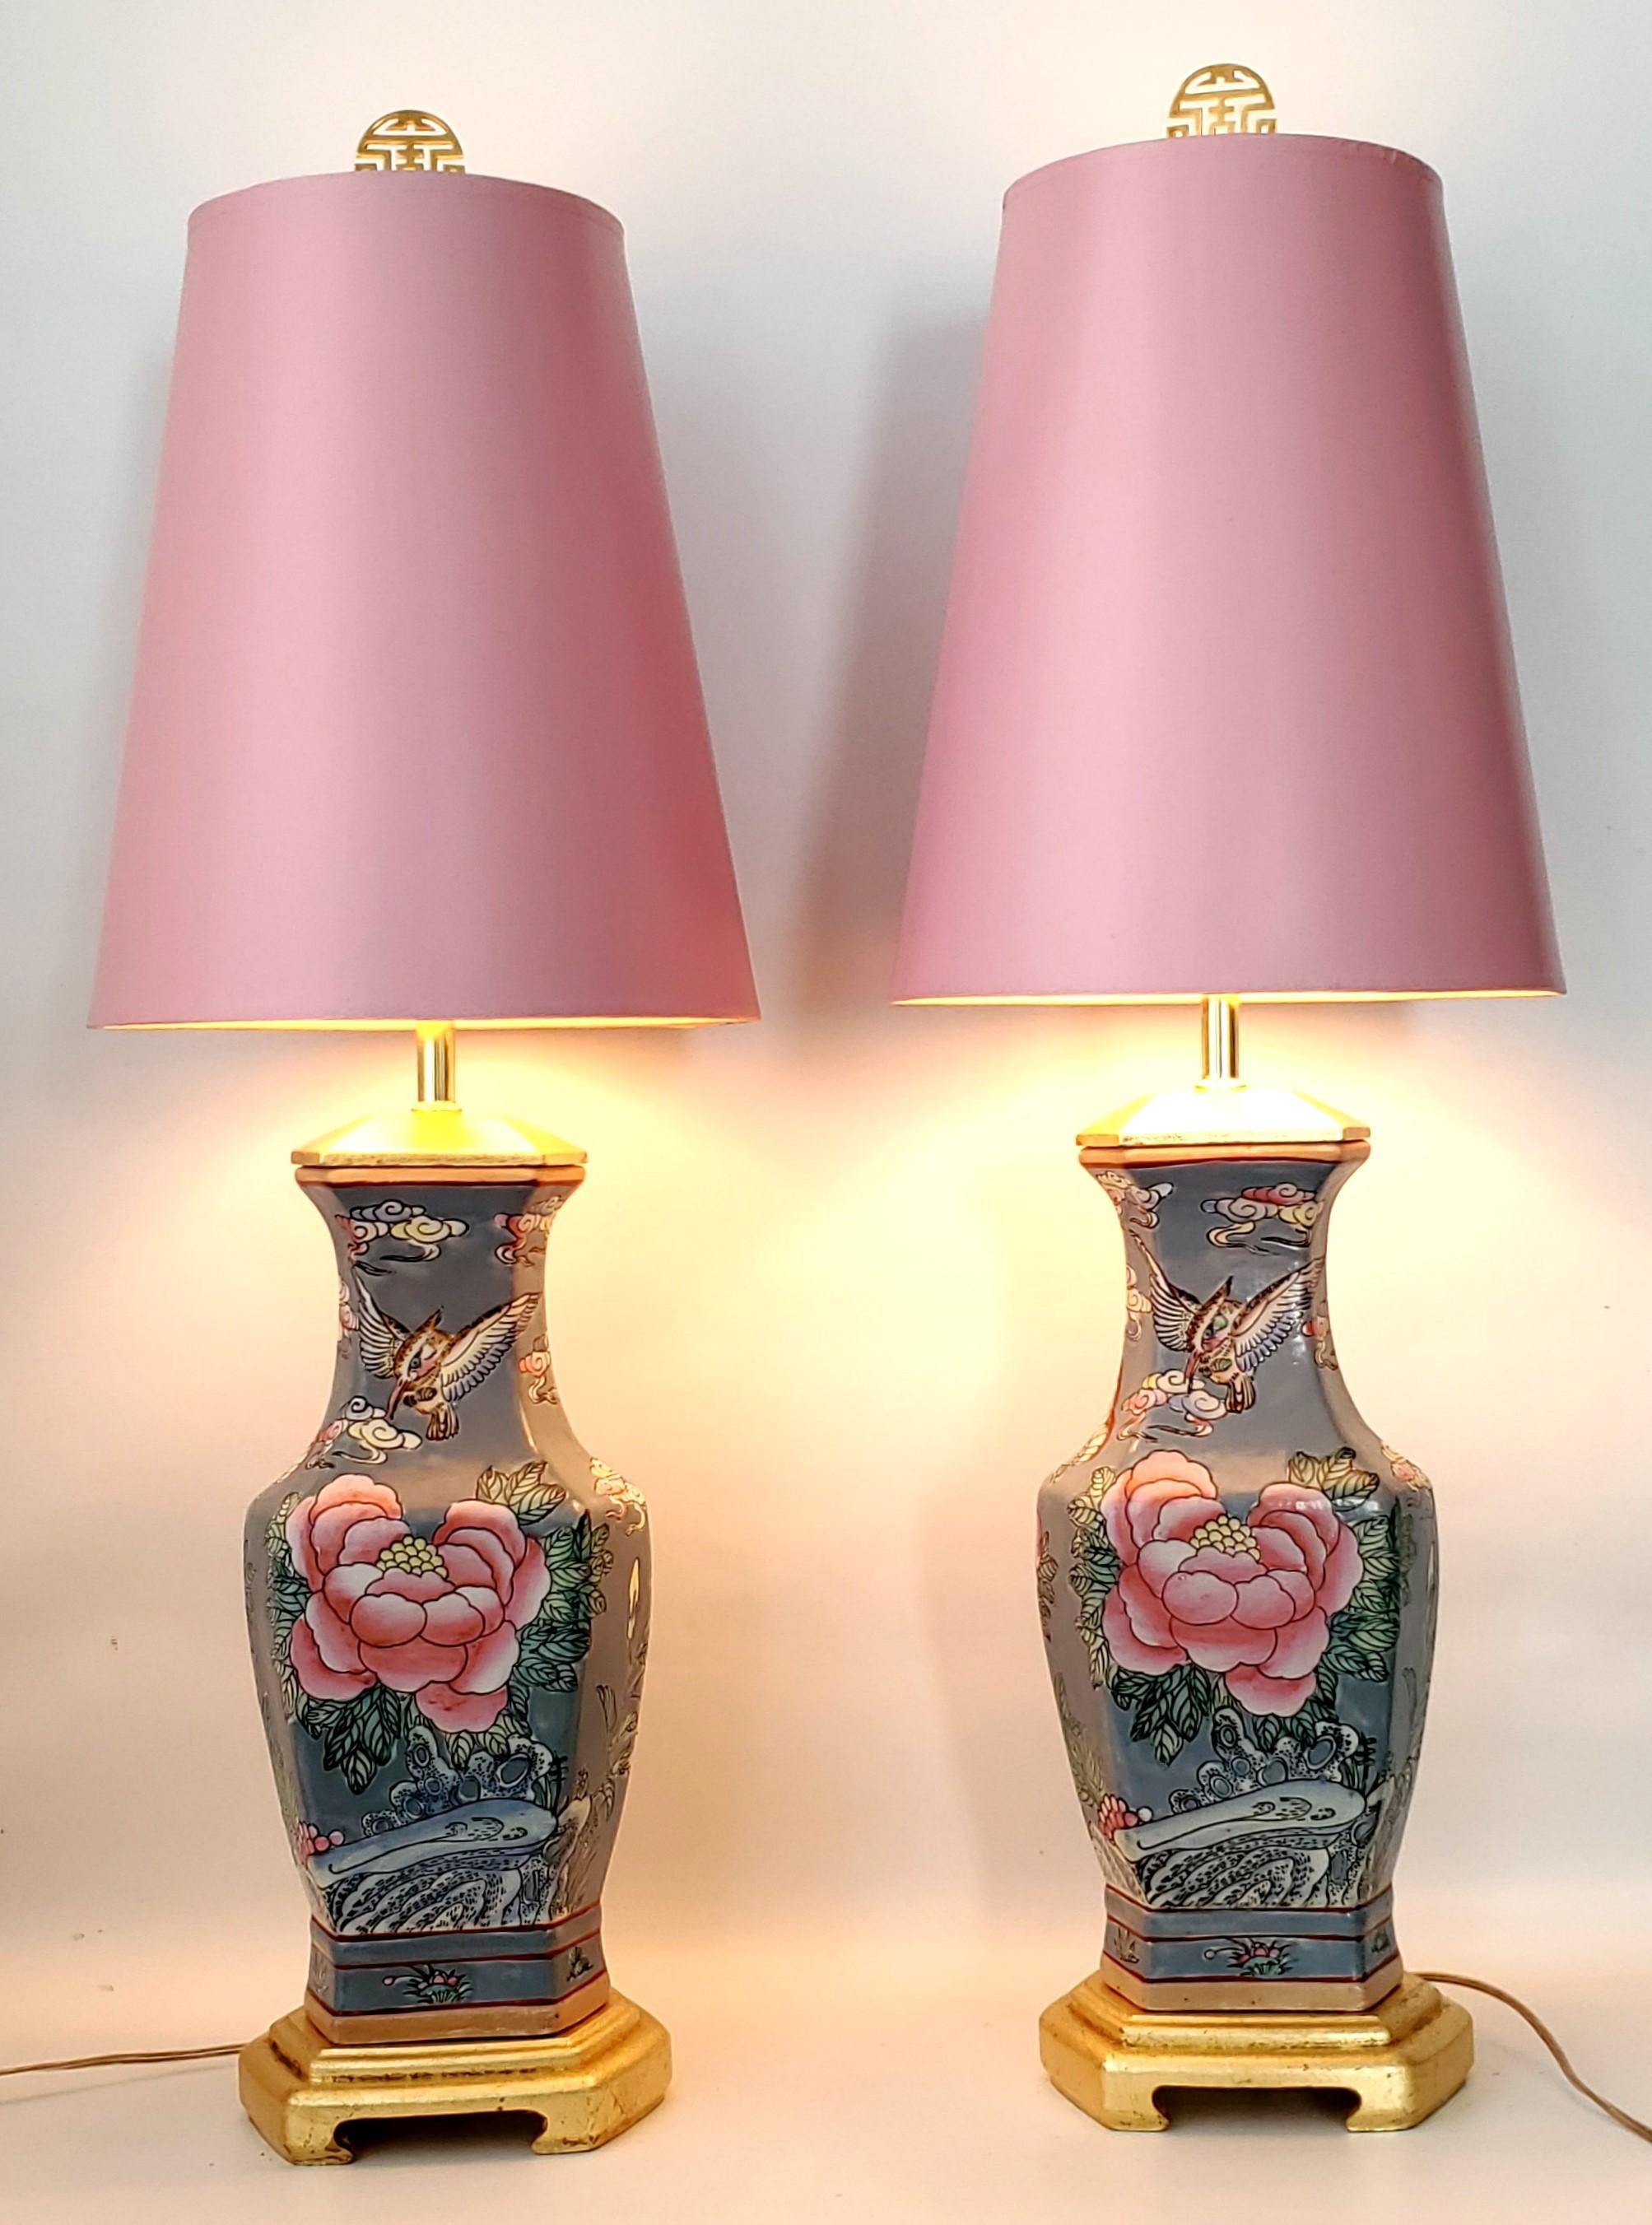 Pair of vintage Chinese porcelain table lamps with vintage pink shades. 
The bodies of the lamps are a gray/blue color with pink roses and butterflies on the front and lavender flowers and butterflies on the back. Old red-iron Chinese symbol on the